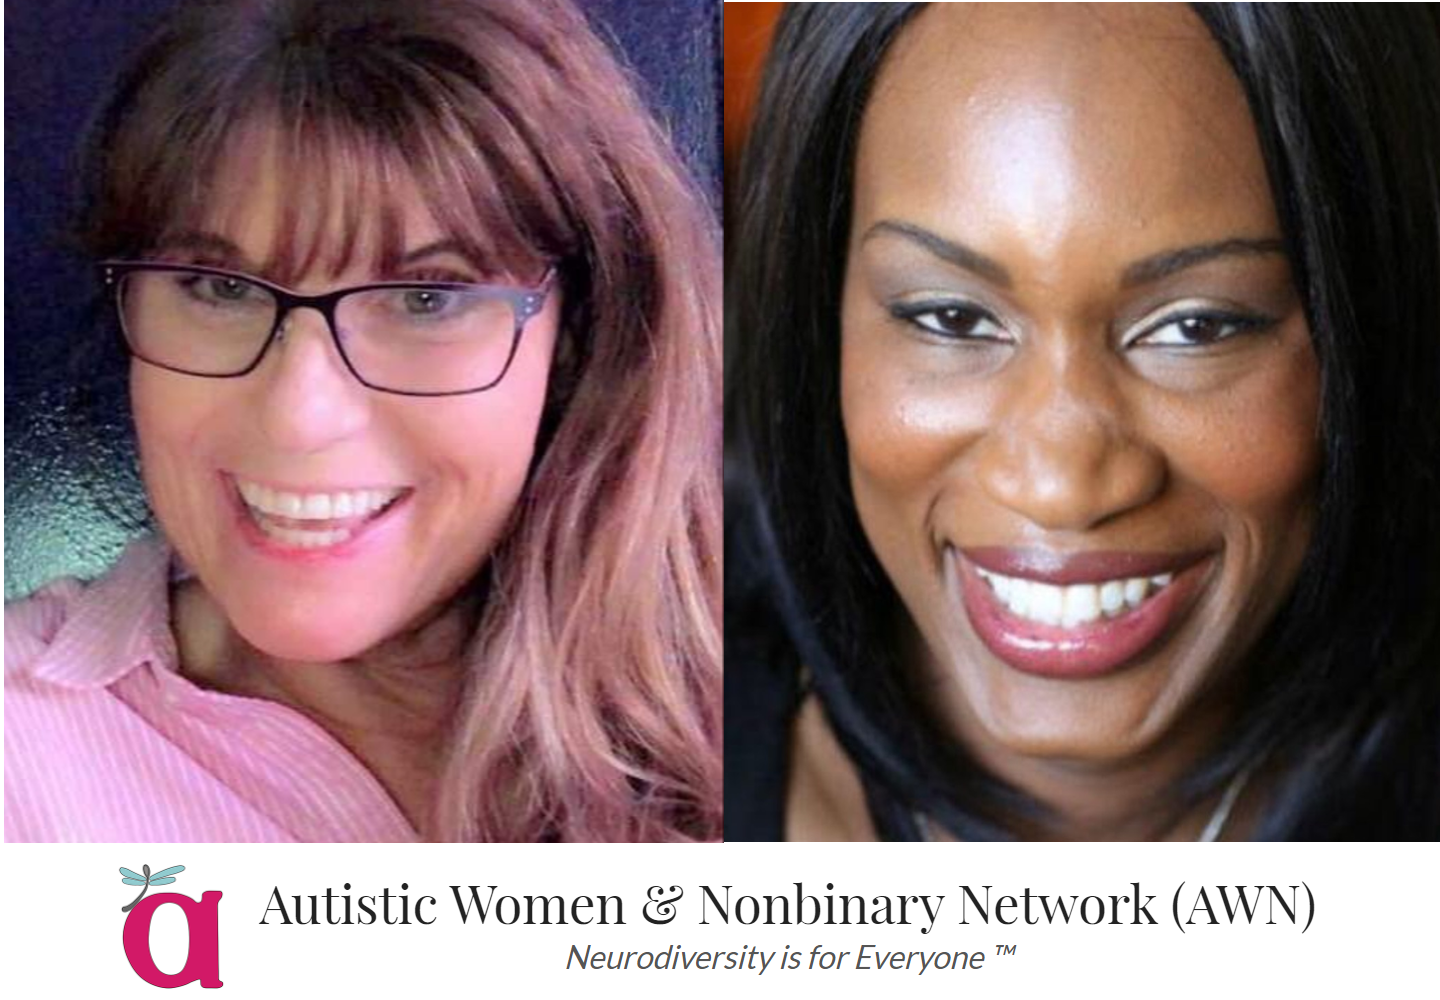 The headshots for Sharon & Morenike are side-by-side, and below them, there's the logo and name of the Autistic Women and Nonbinary Network (AWN)